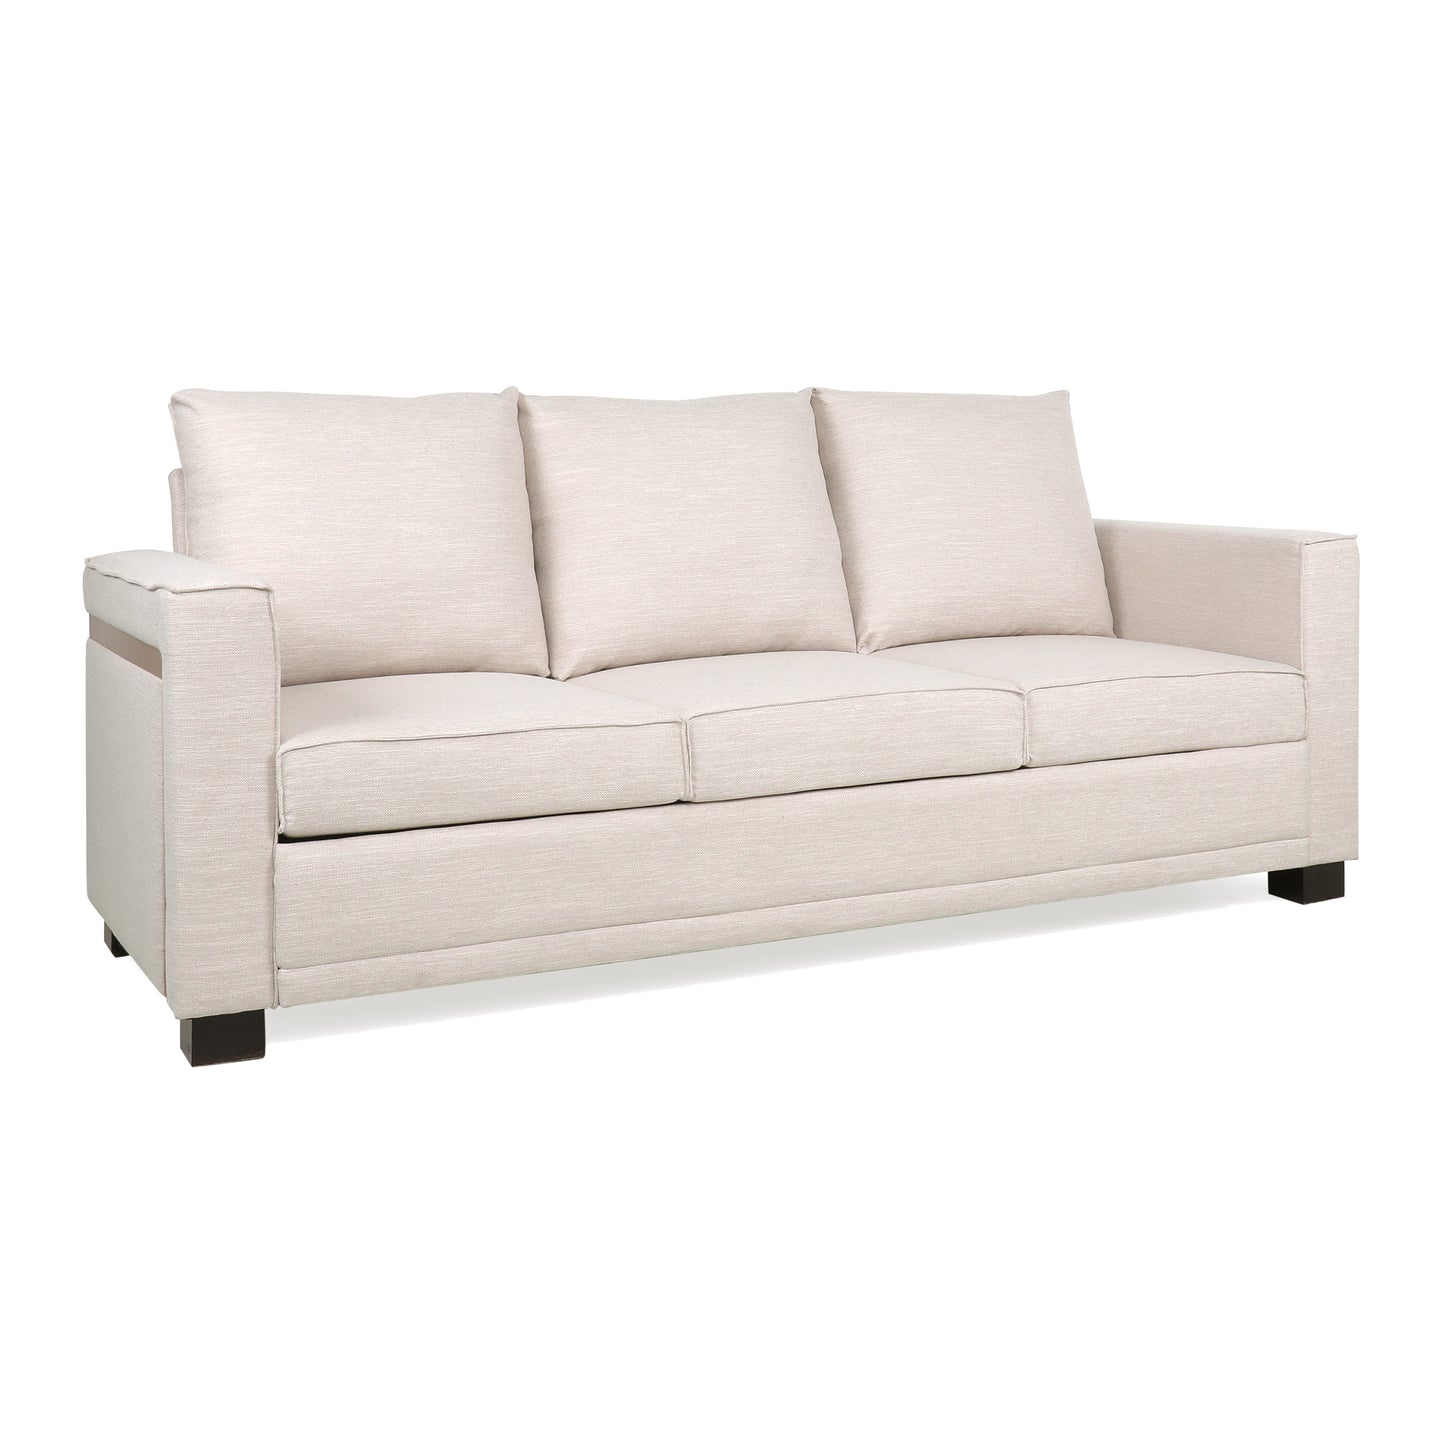 Moultrie Contemporary Upholstered 3 Seater Sofa